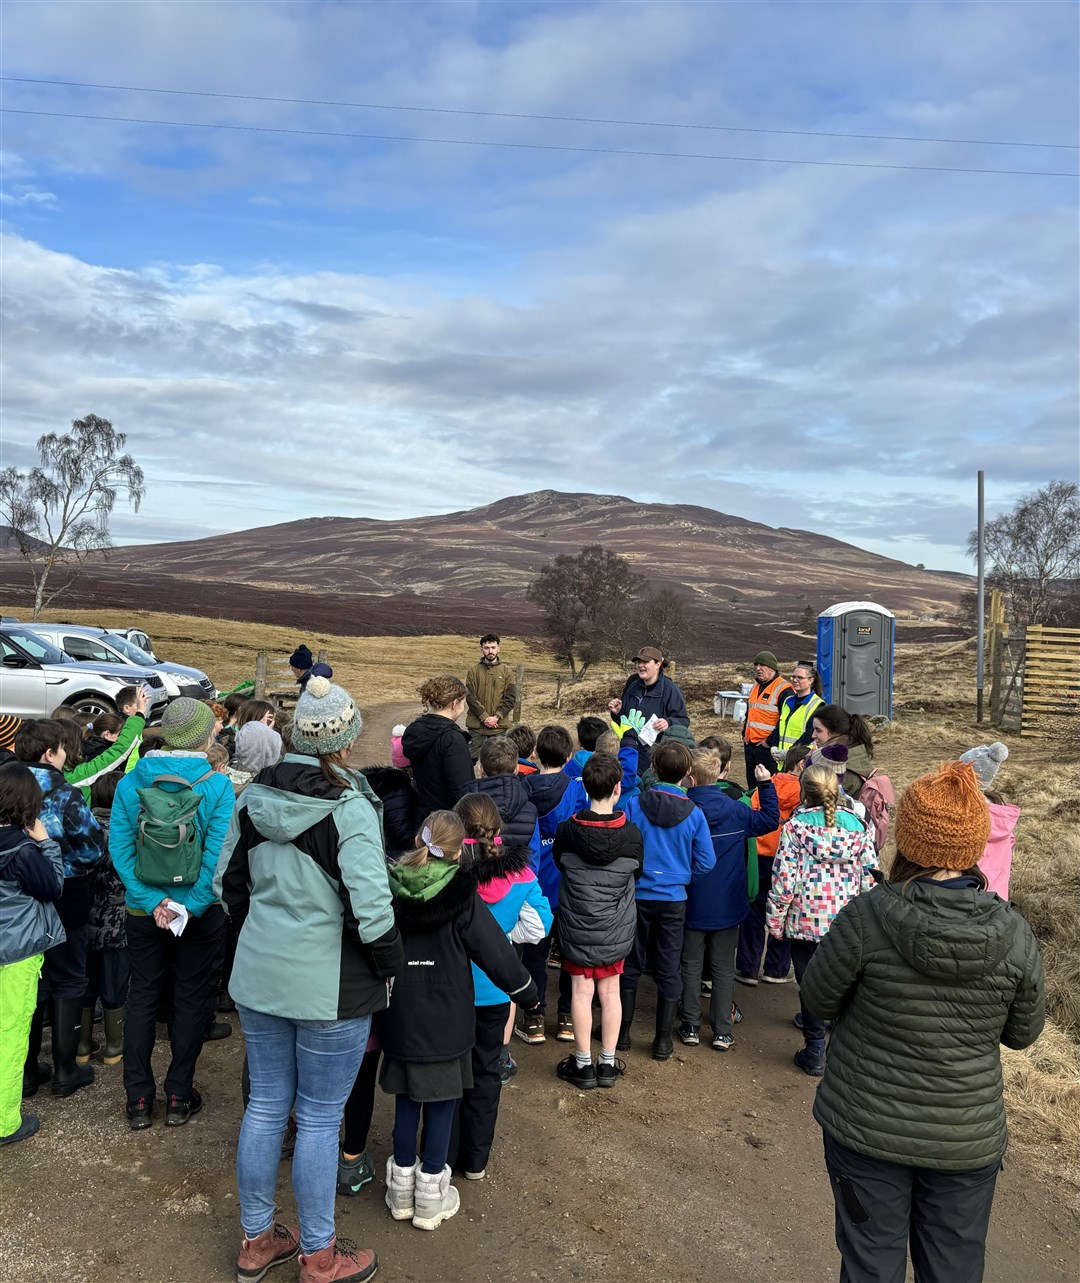 Over 400,000 trees have now been planted in the Cairngorms National Park.